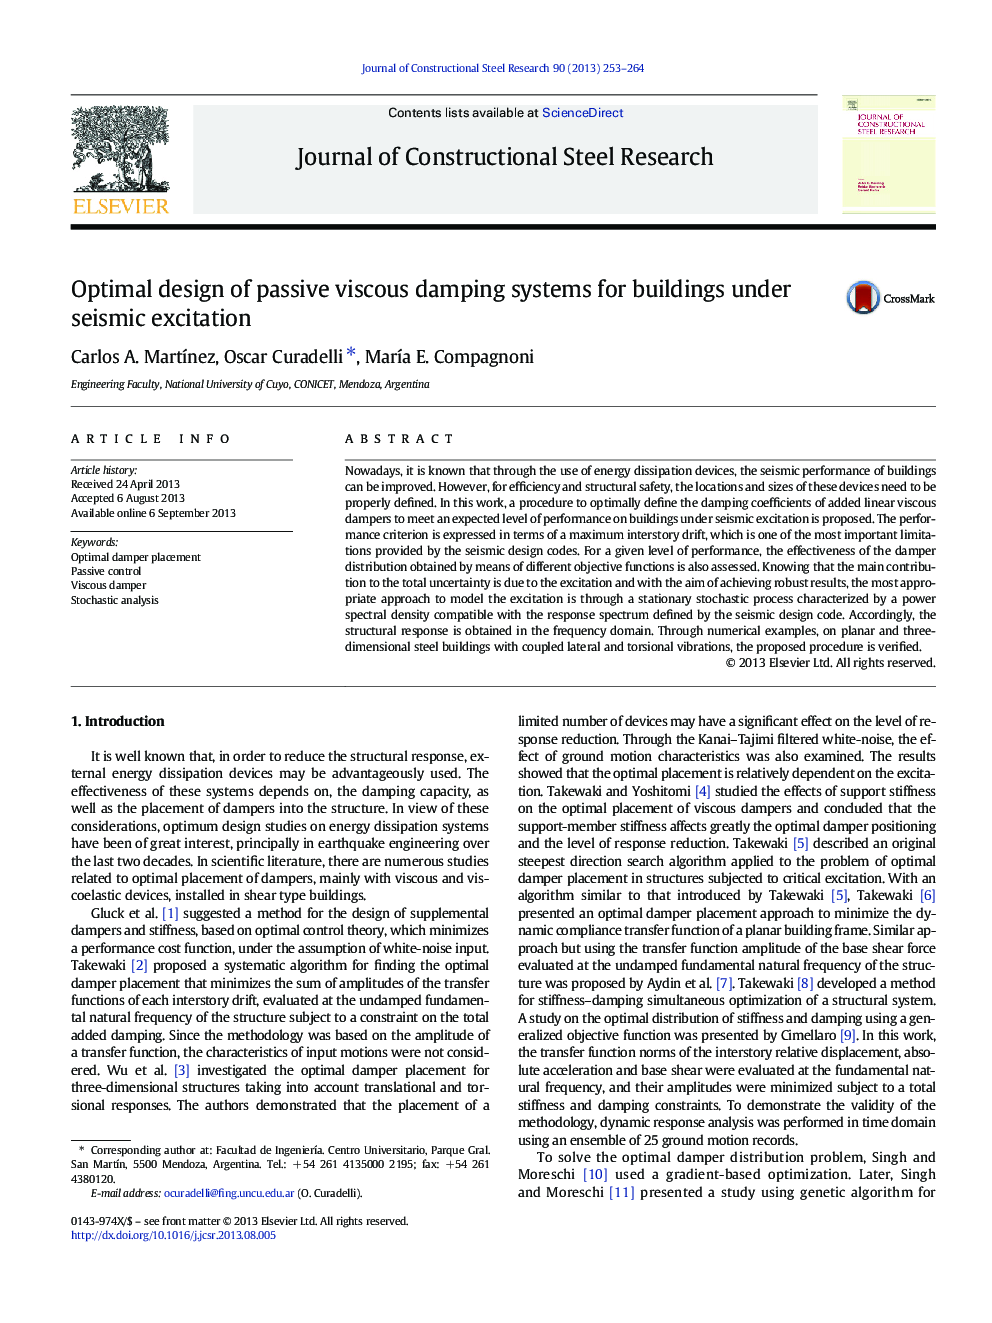 Optimal design of passive viscous damping systems for buildings under seismic excitation